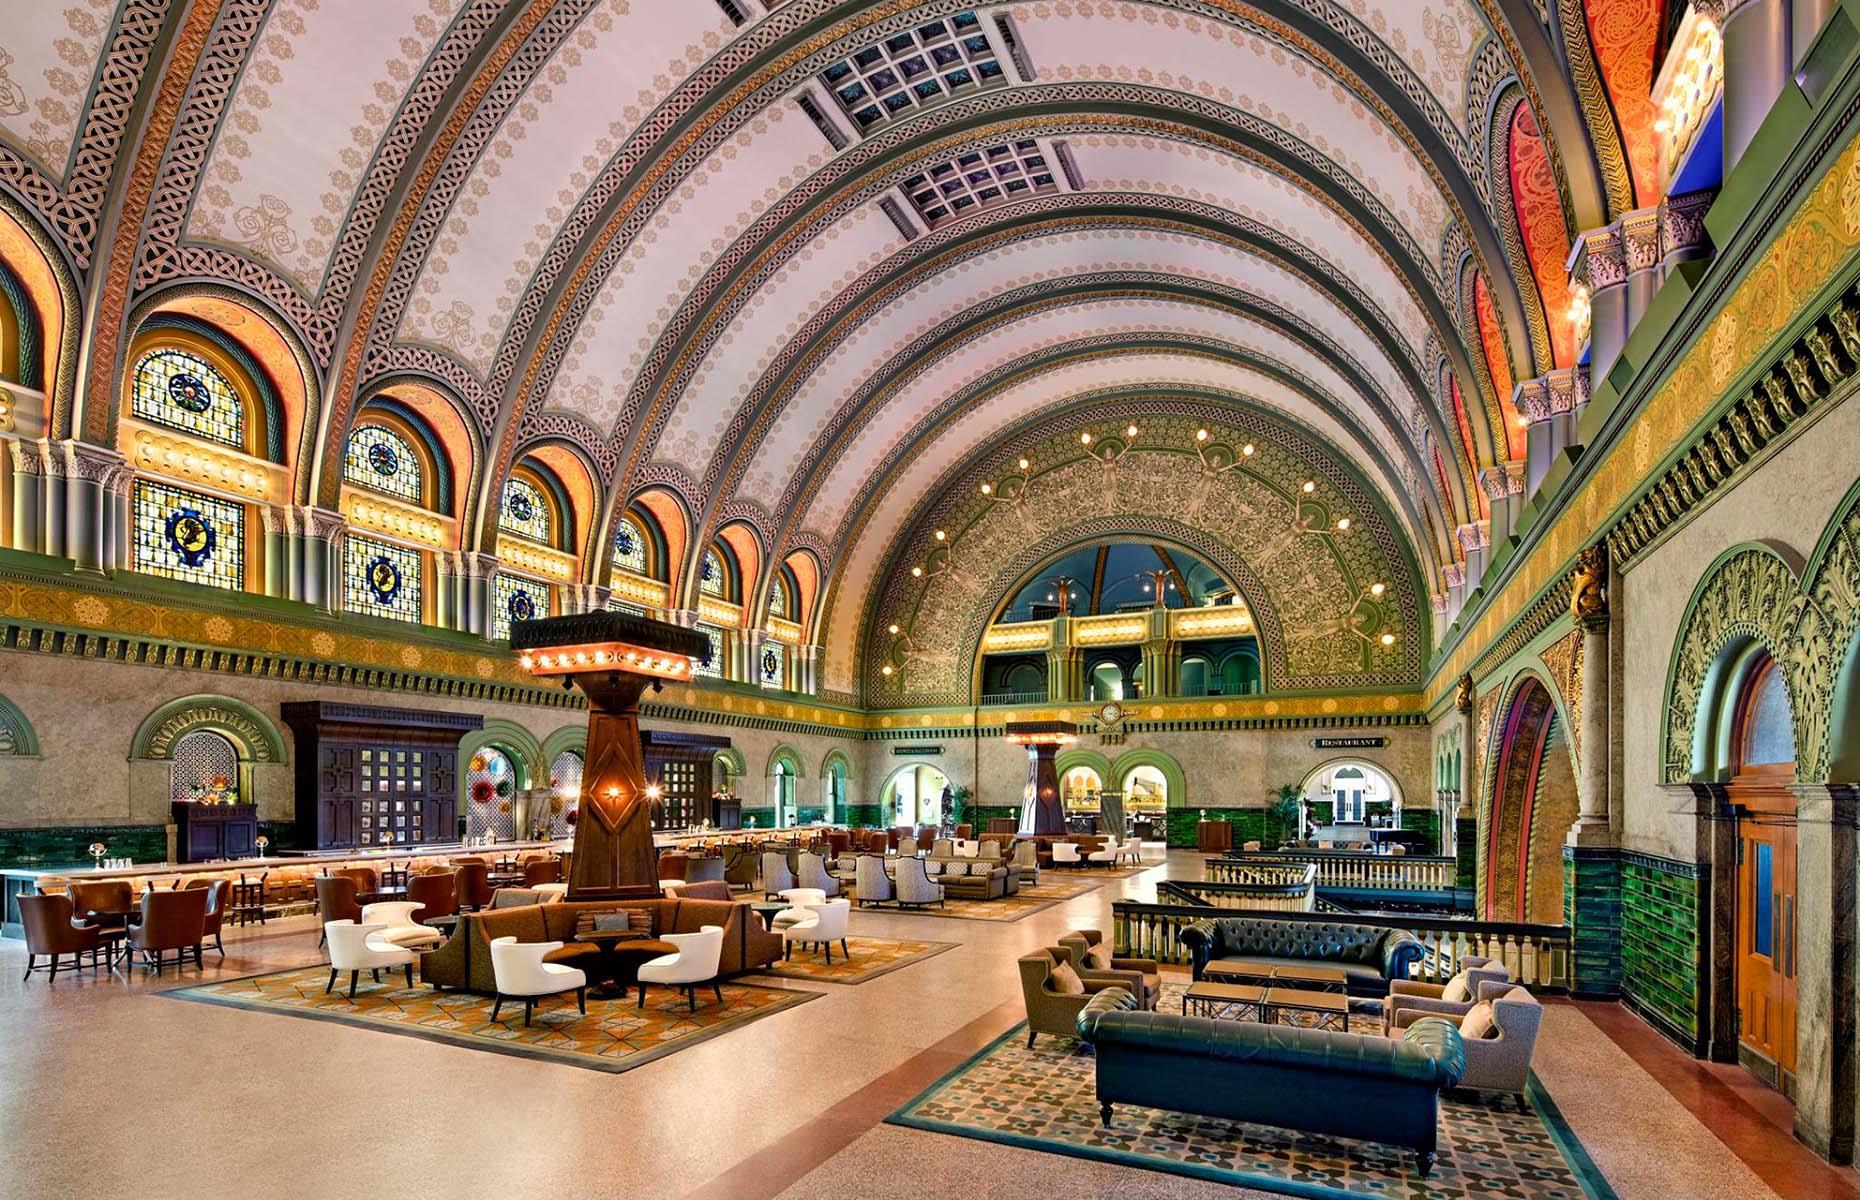 These Beautiful Hotel Lobbies Will Dazzle You